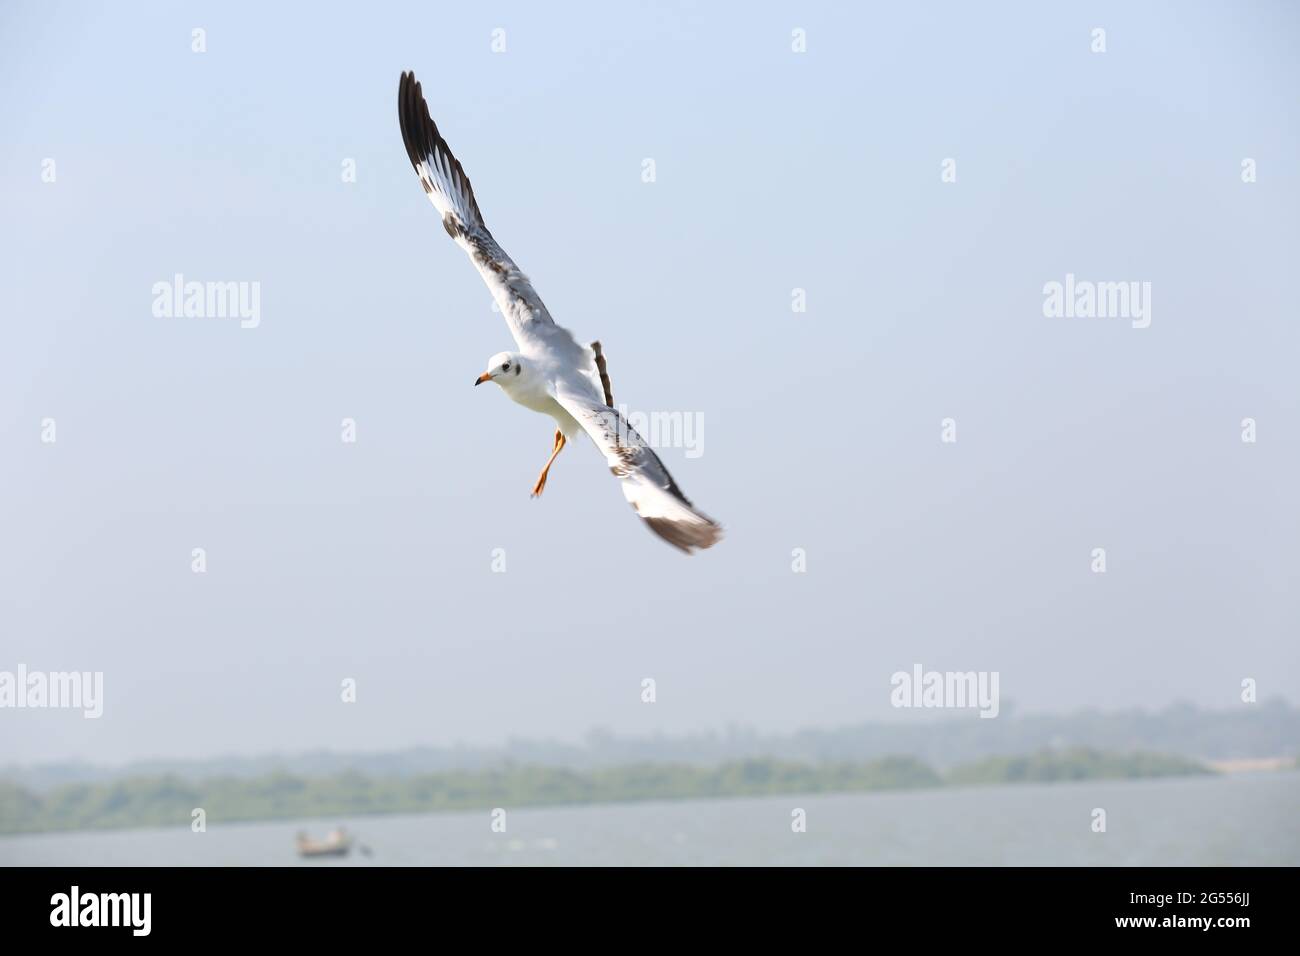 Black headed gull flying over water surface. A flock of common black headed gulls, sea gulls, flying over a beach Stock Photo